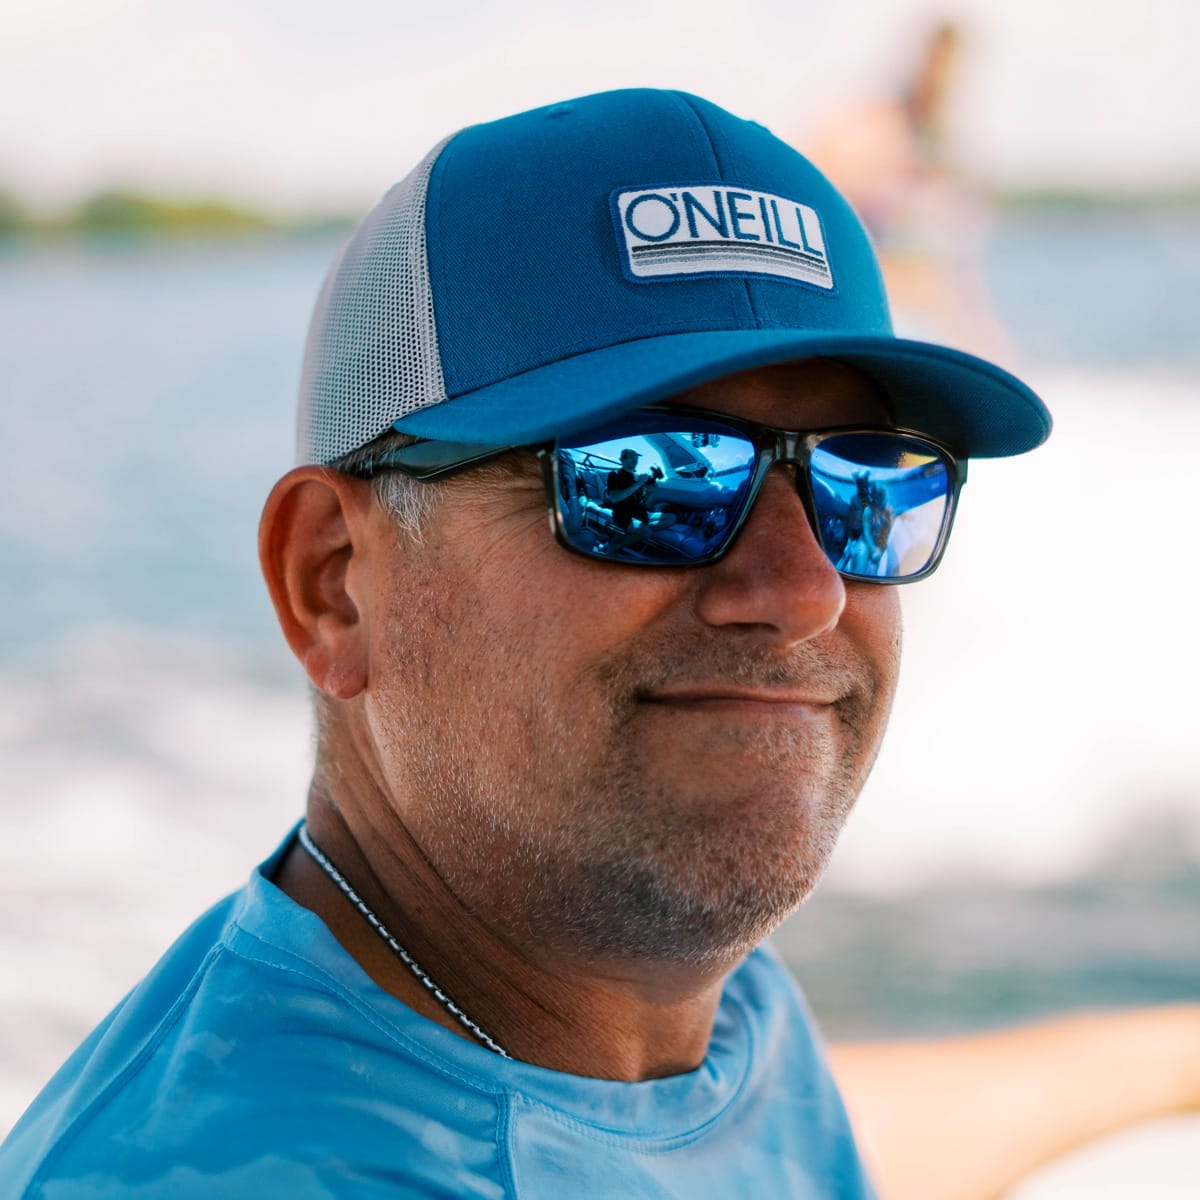 A man wearing sunglasses and a hat on a boat.